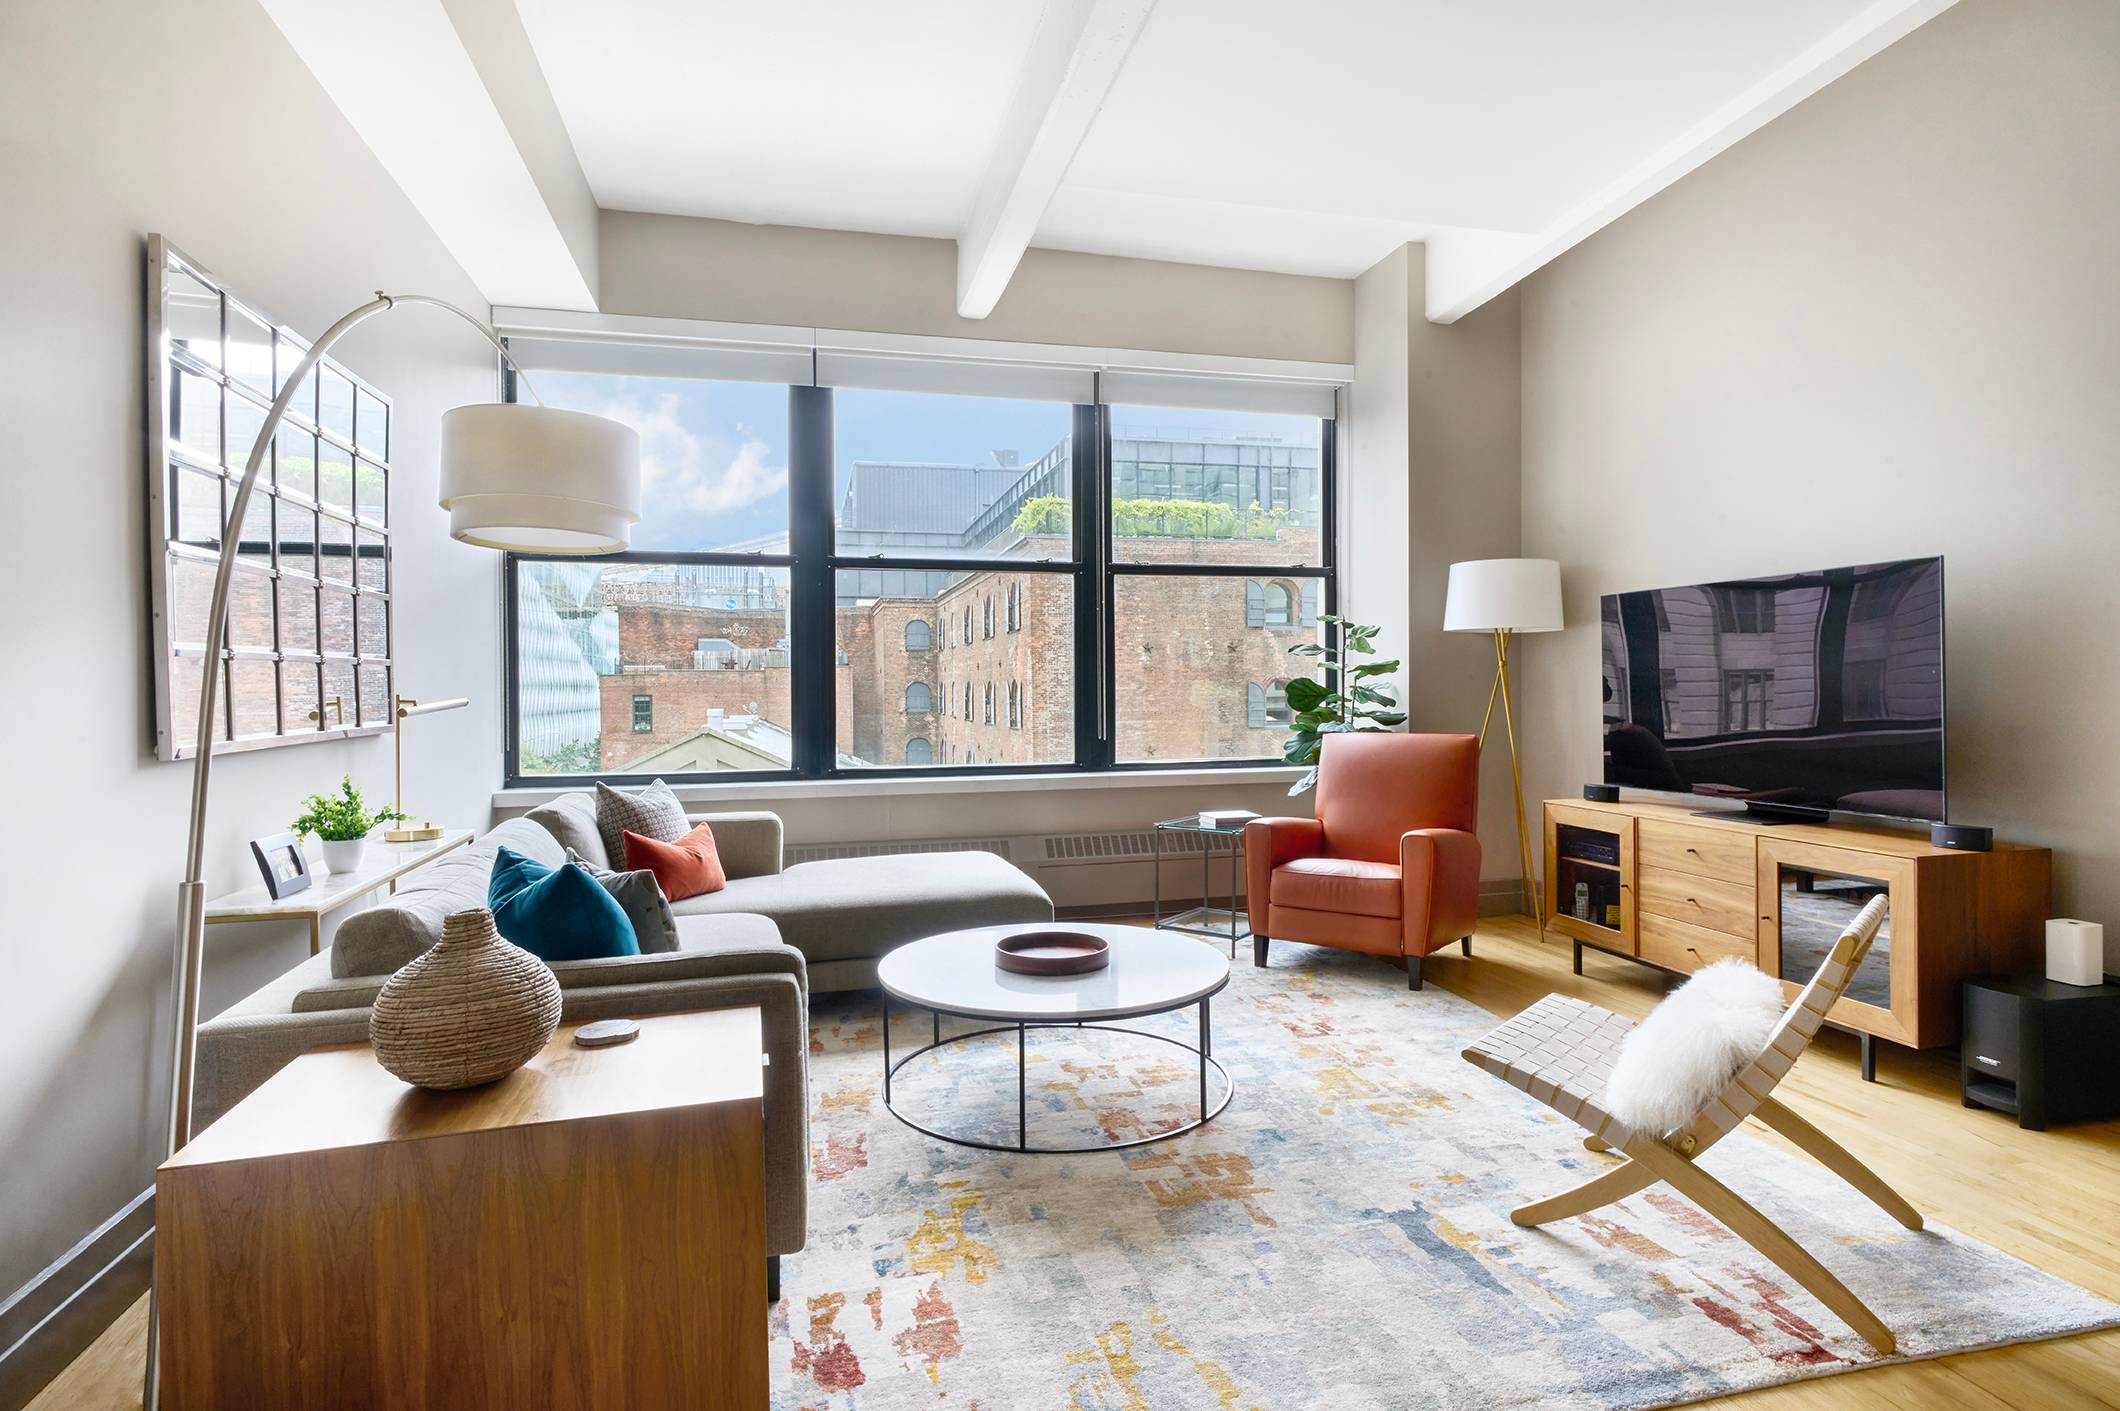 Dramatic loft proportions and masterful updates define this stunning one bedroom plus den, two bathroom residence in The Clock Tower, Dumbo's most revered luxury condominium.